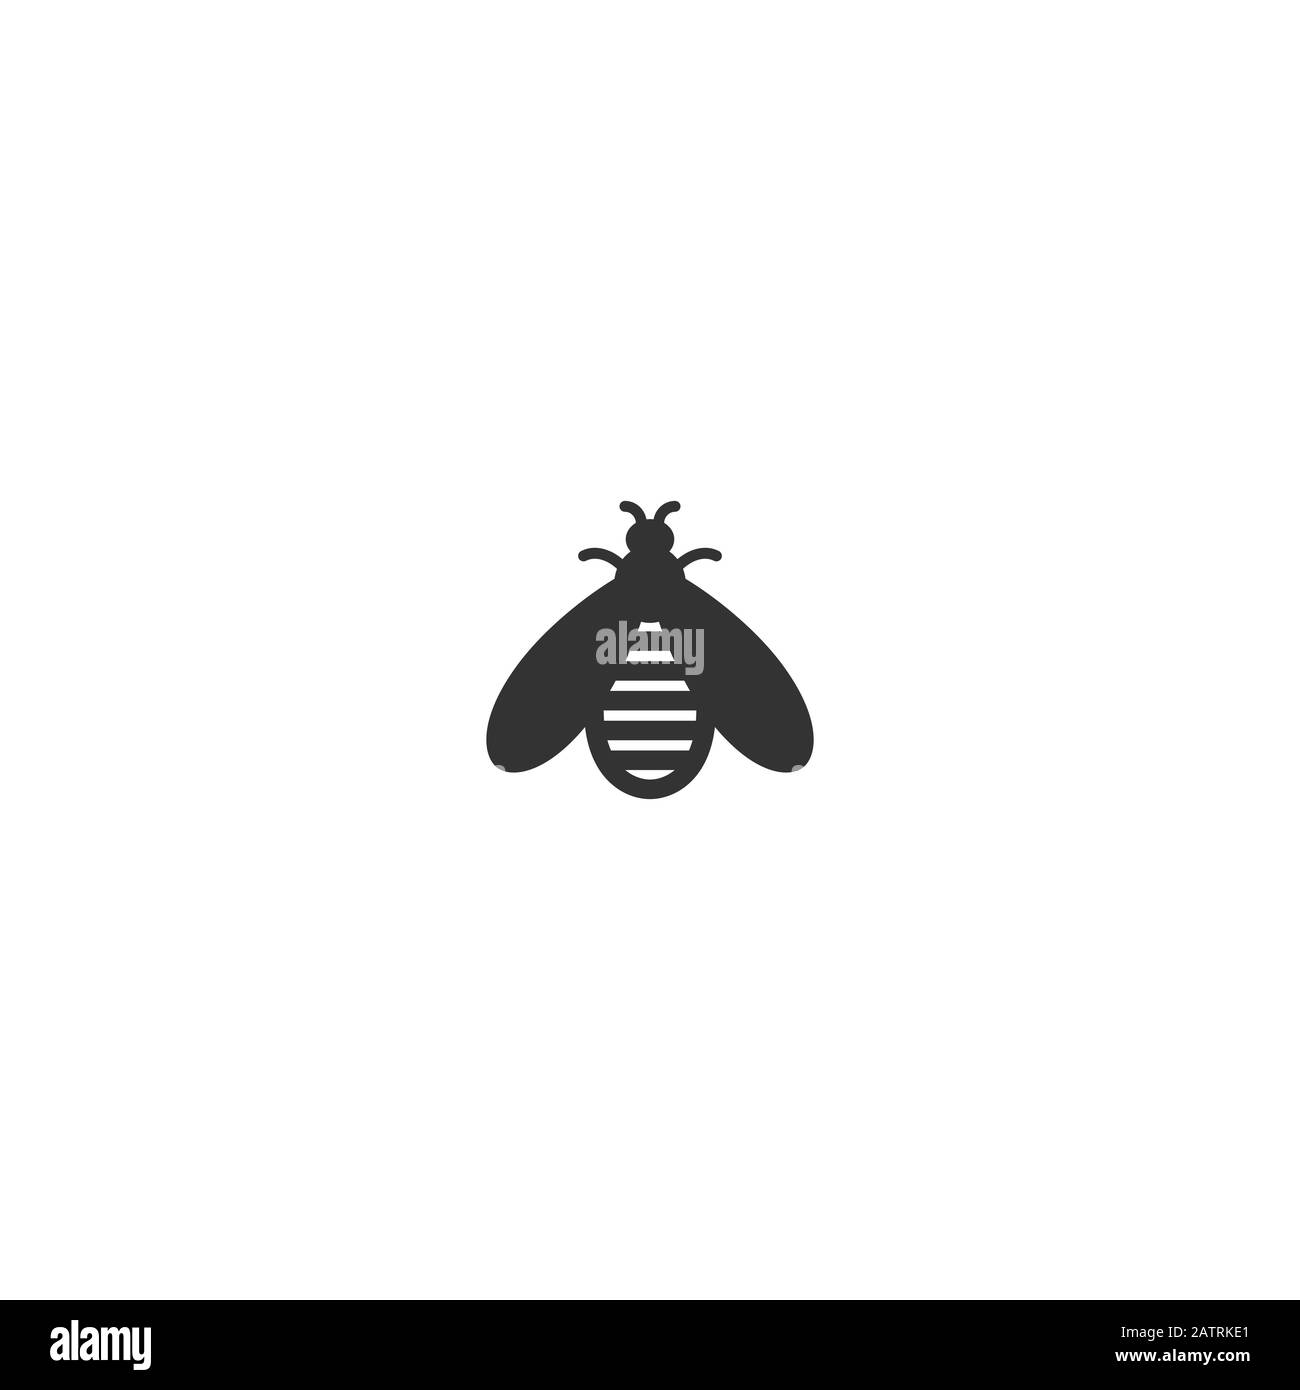 Black honey bee simple silhouette flat icon isolated on white. Stock Vector